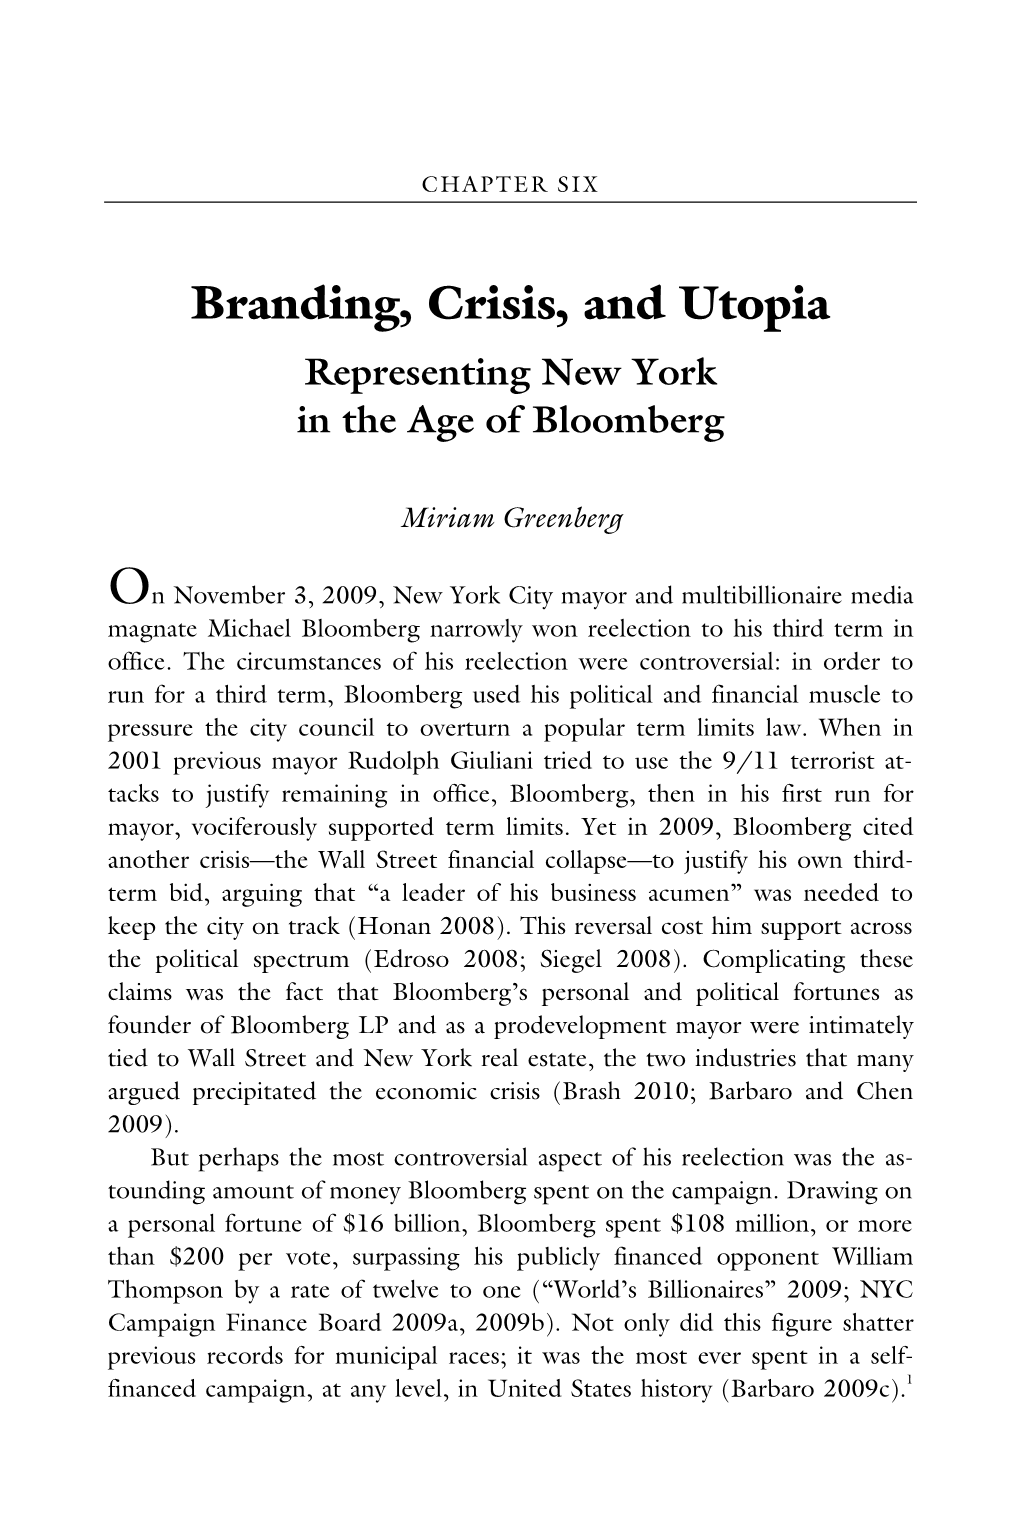 Branding, Crisis and Utopia: Representing New York in the Age